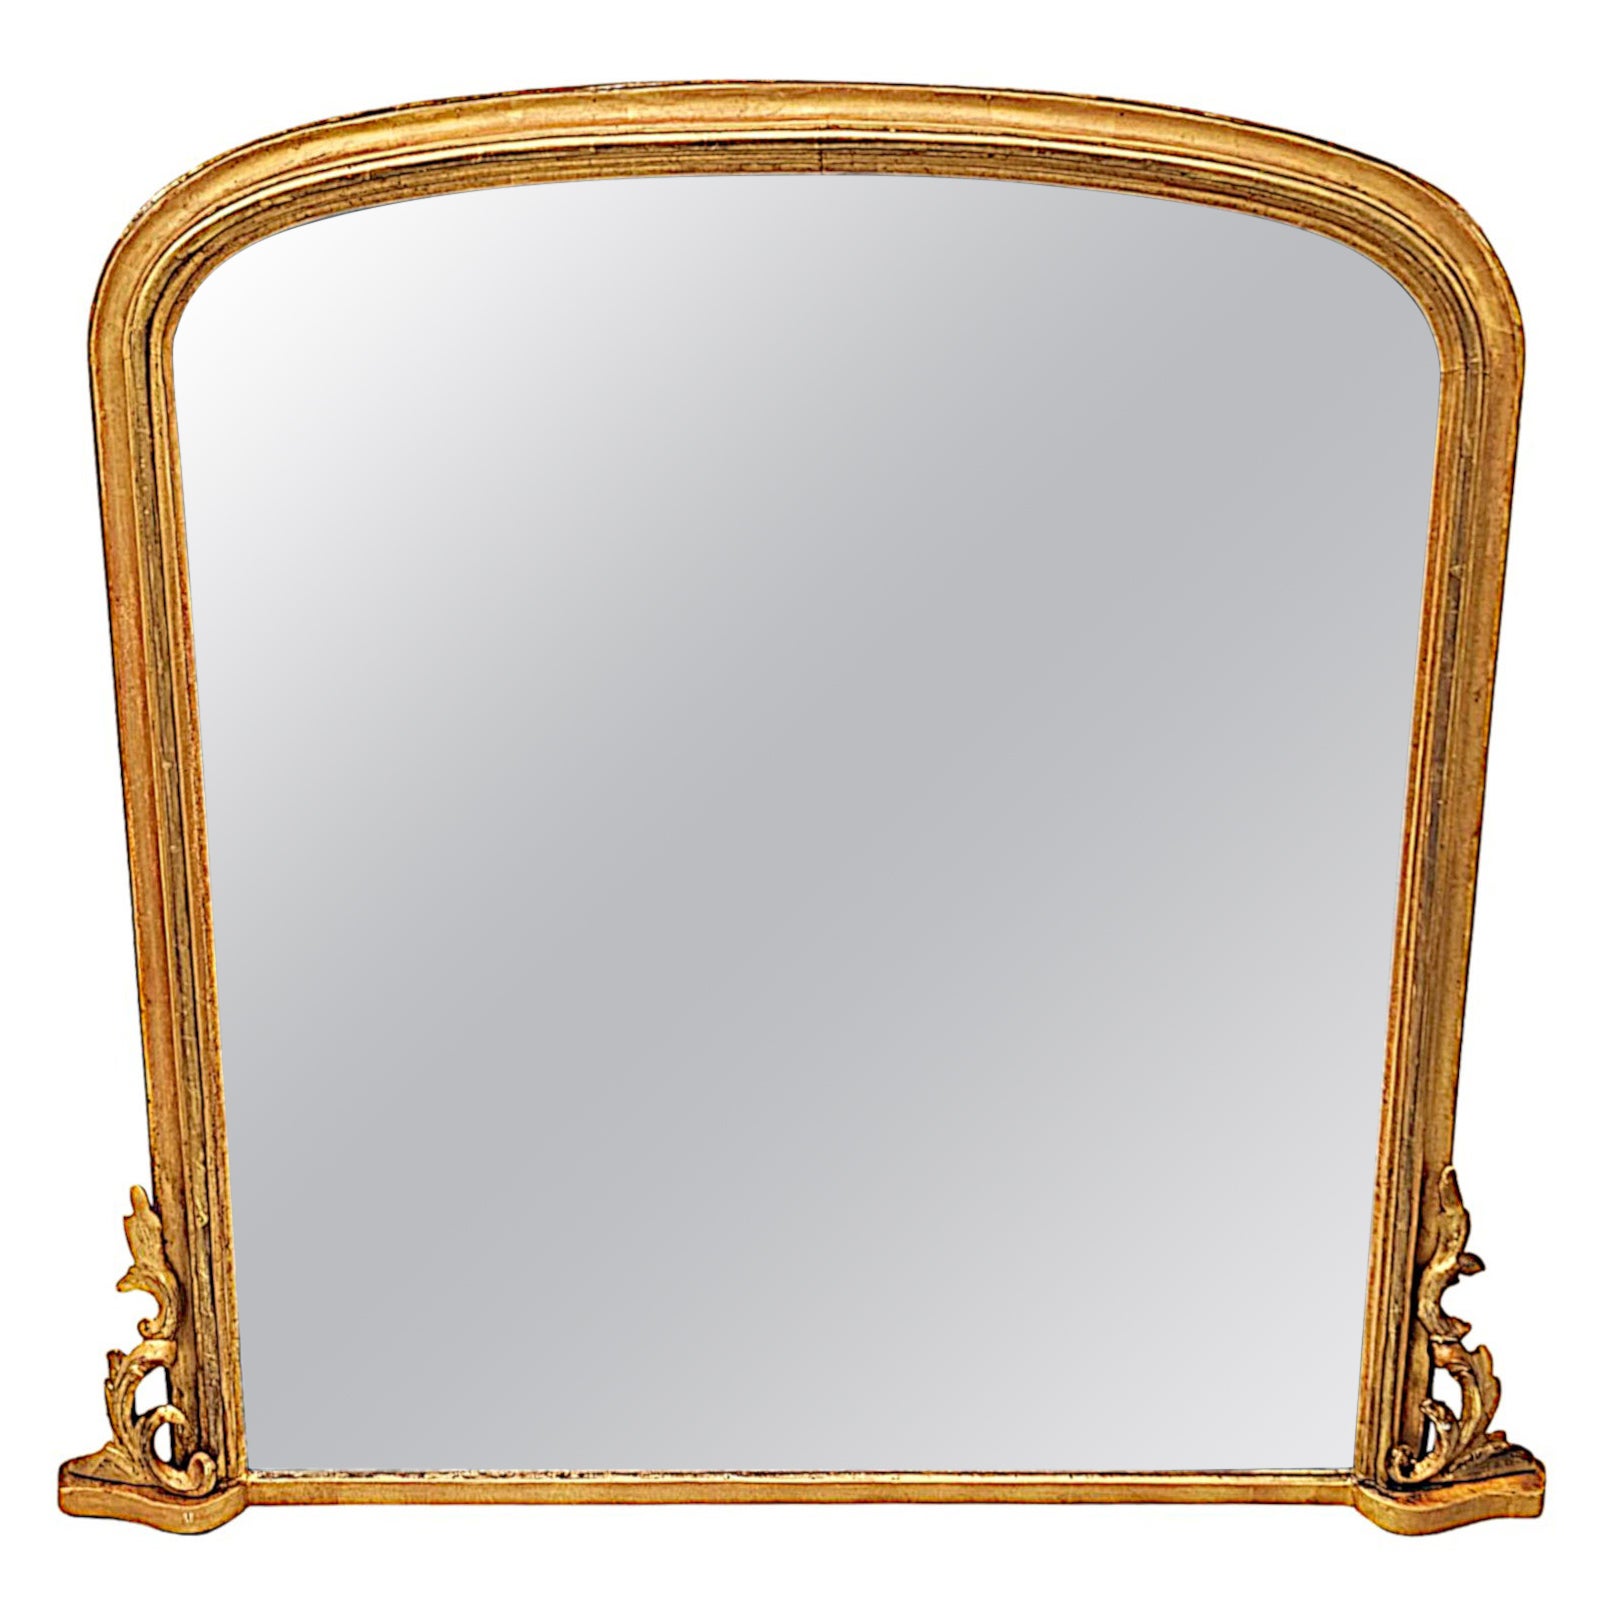  A Fabulous 19th Century Giltwood Archtop Overmantel Mirror